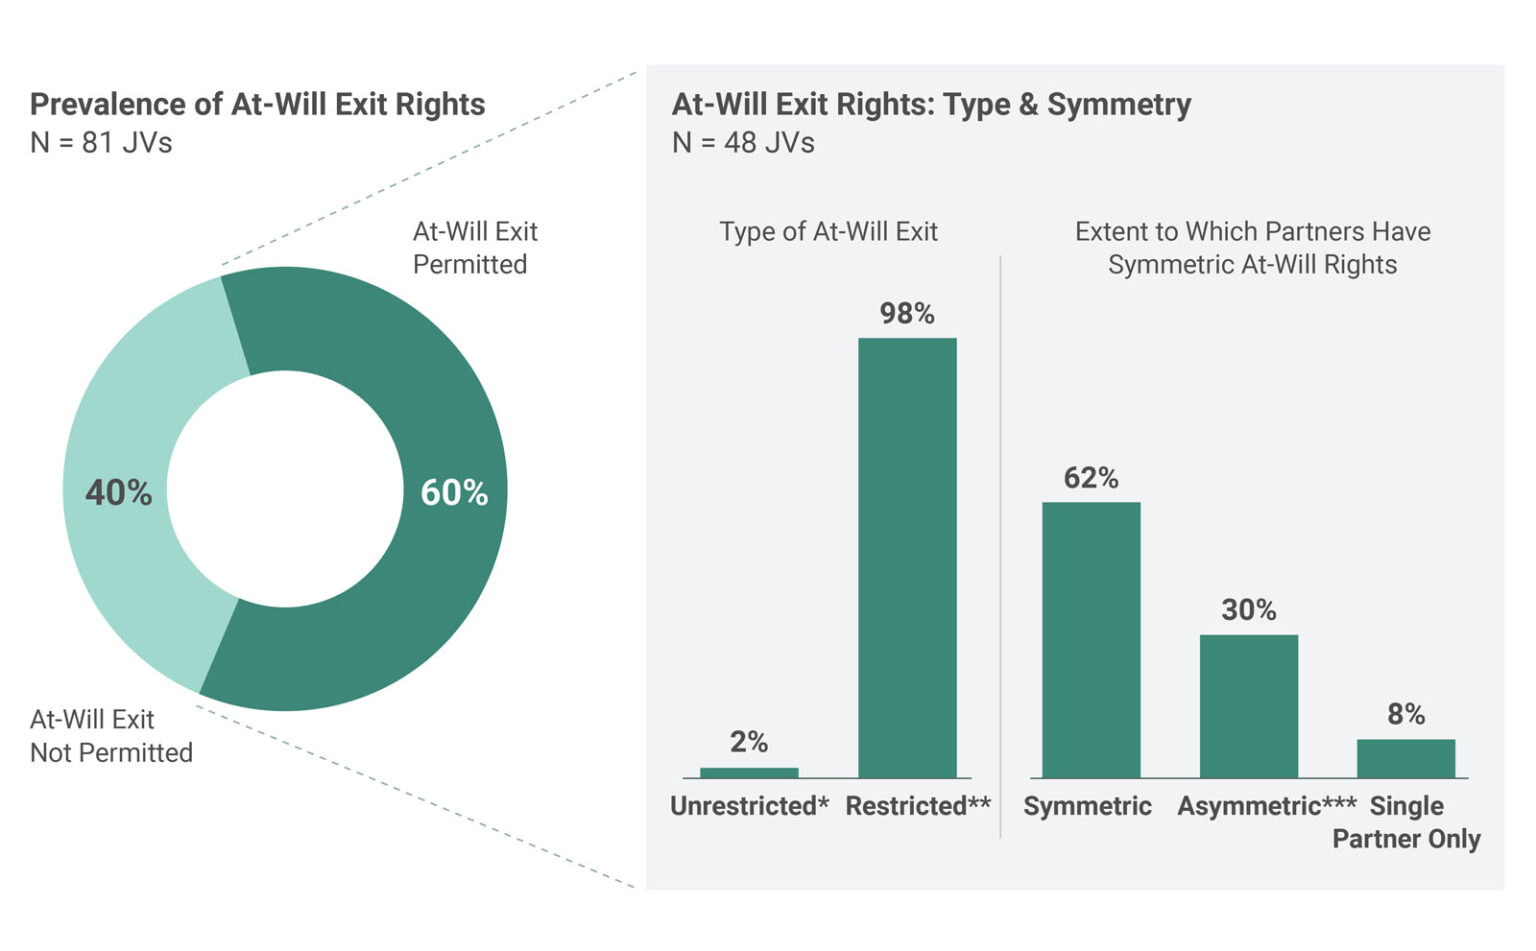 Exhibit 2: At-Will Exit Rights Key Findings